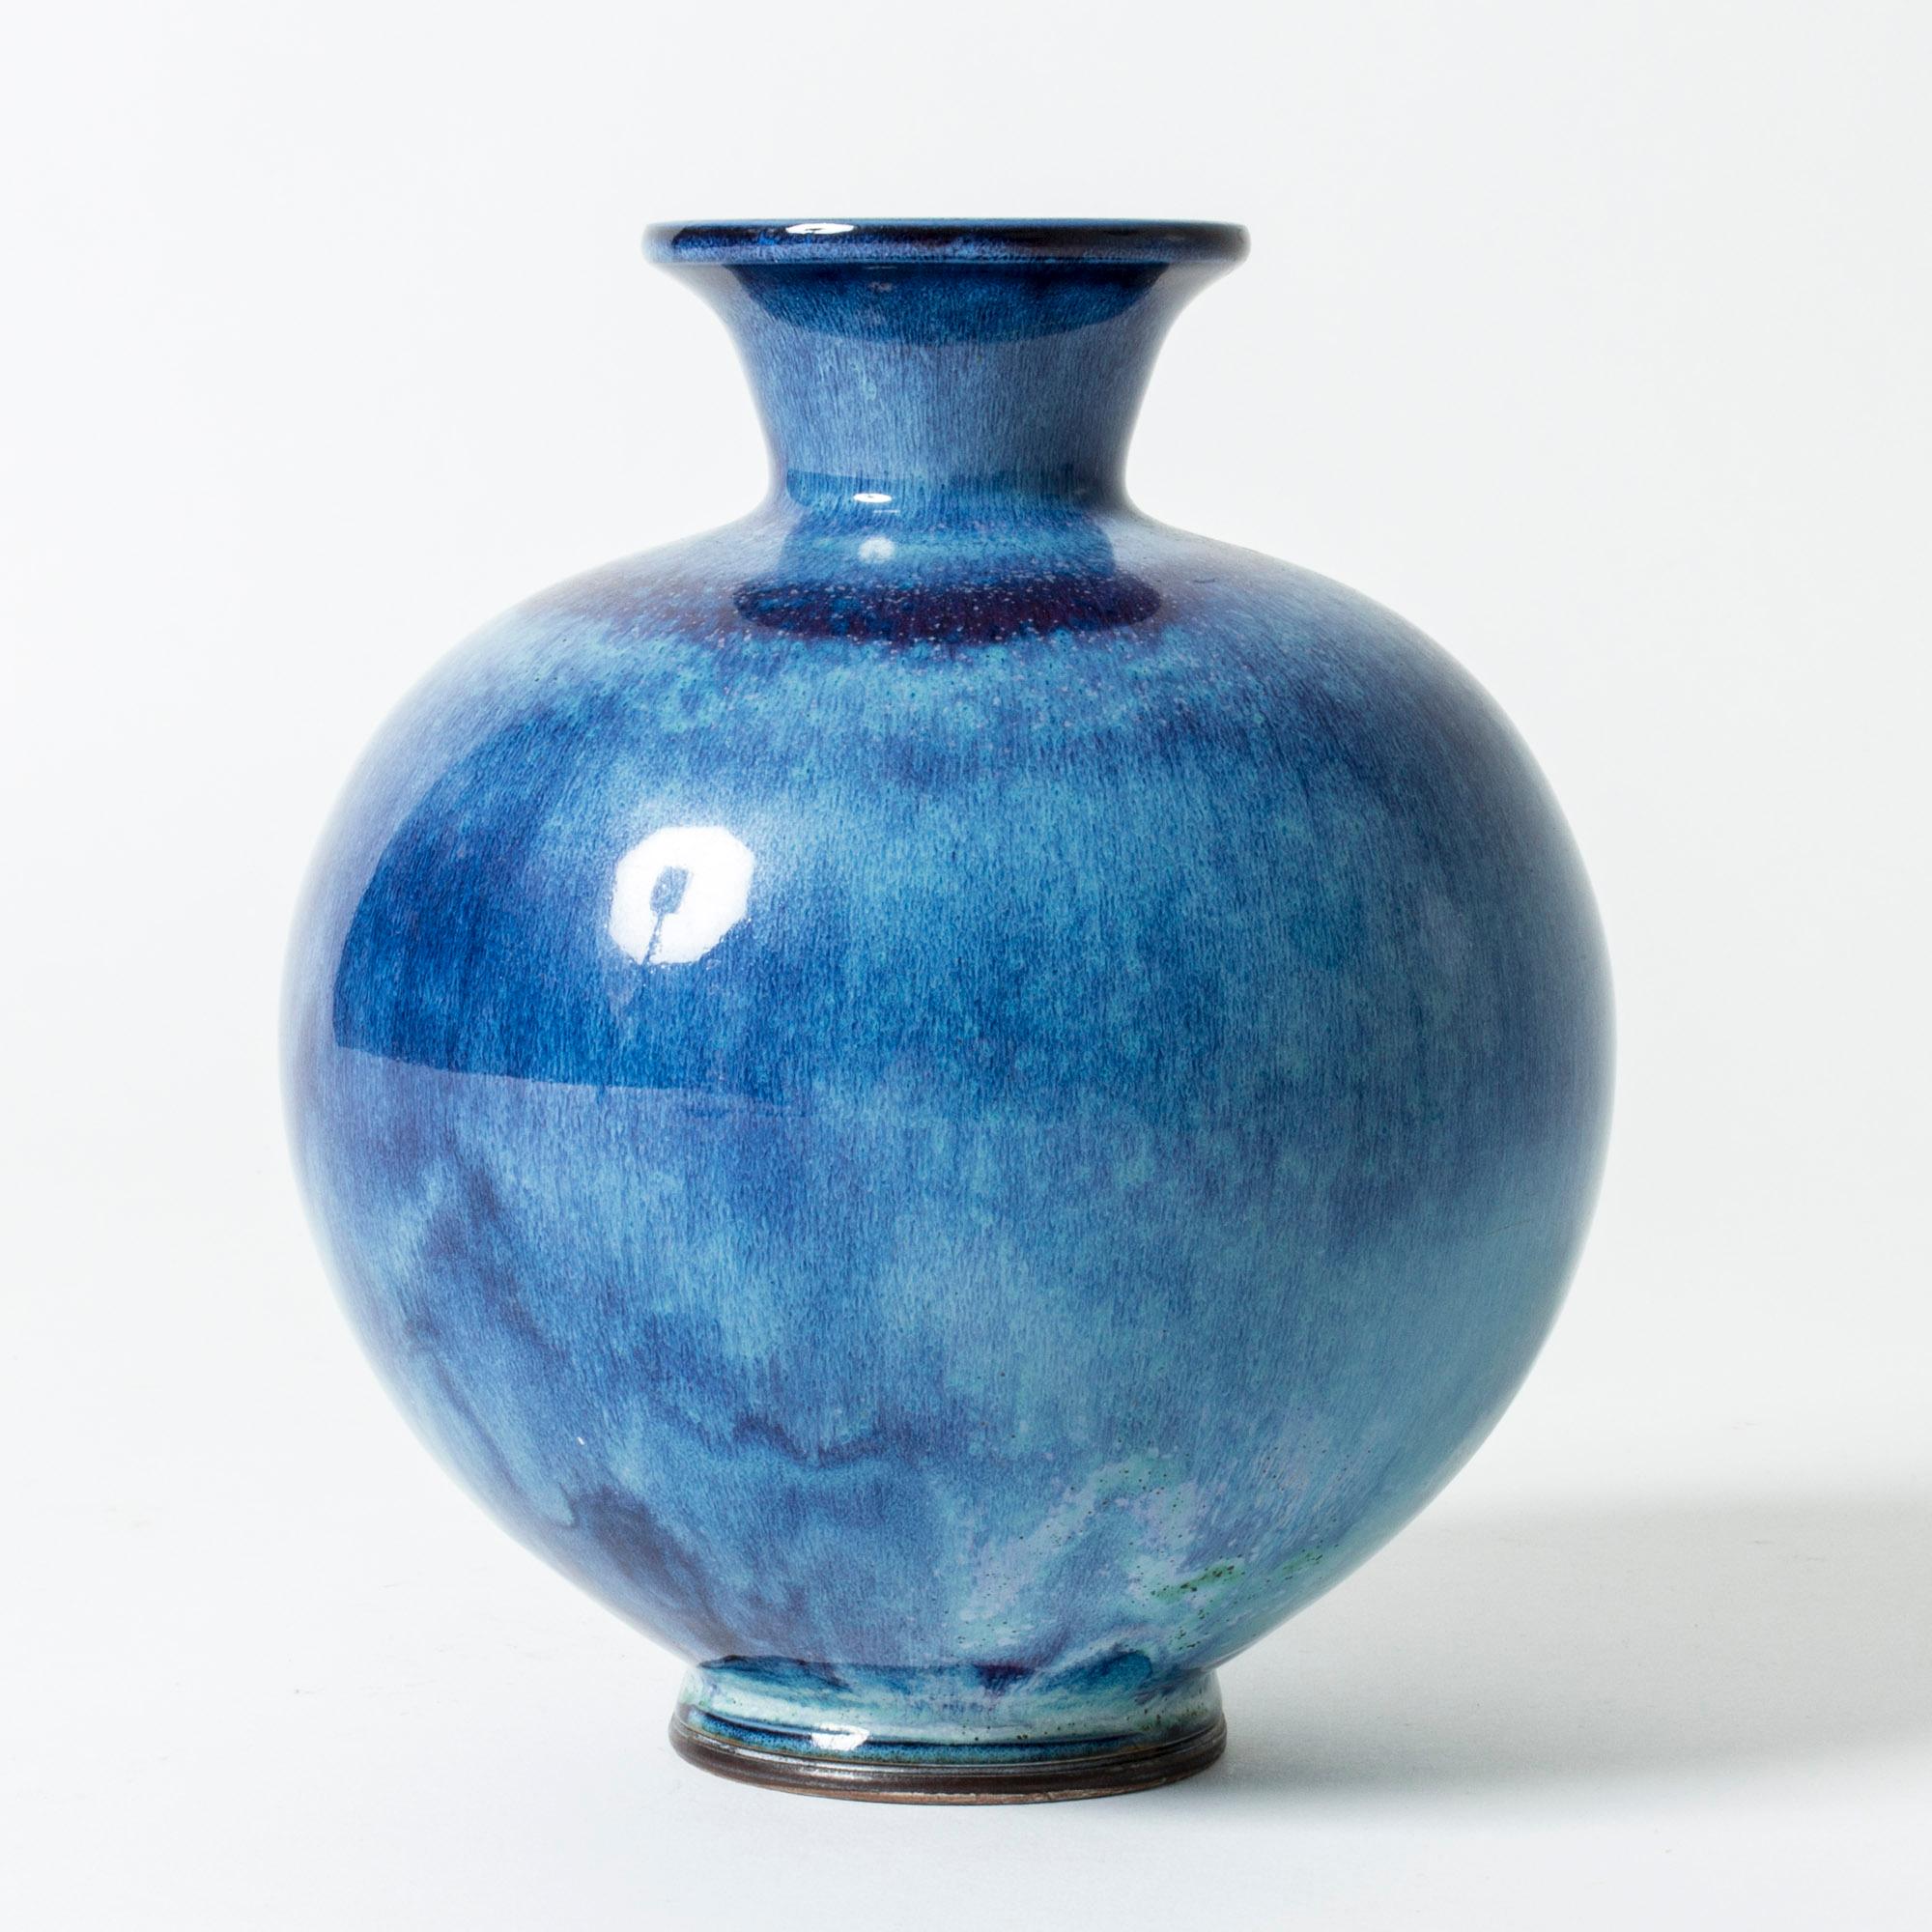 Beautiful stoneware vase by Berndt Friberg in a plump design. Vibrant “Aniara” glaze in bright blue with a meandering pattern in different hues.

Berndt Friberg was a Swedish ceramicist, renowned for his stoneware vases and vessels for